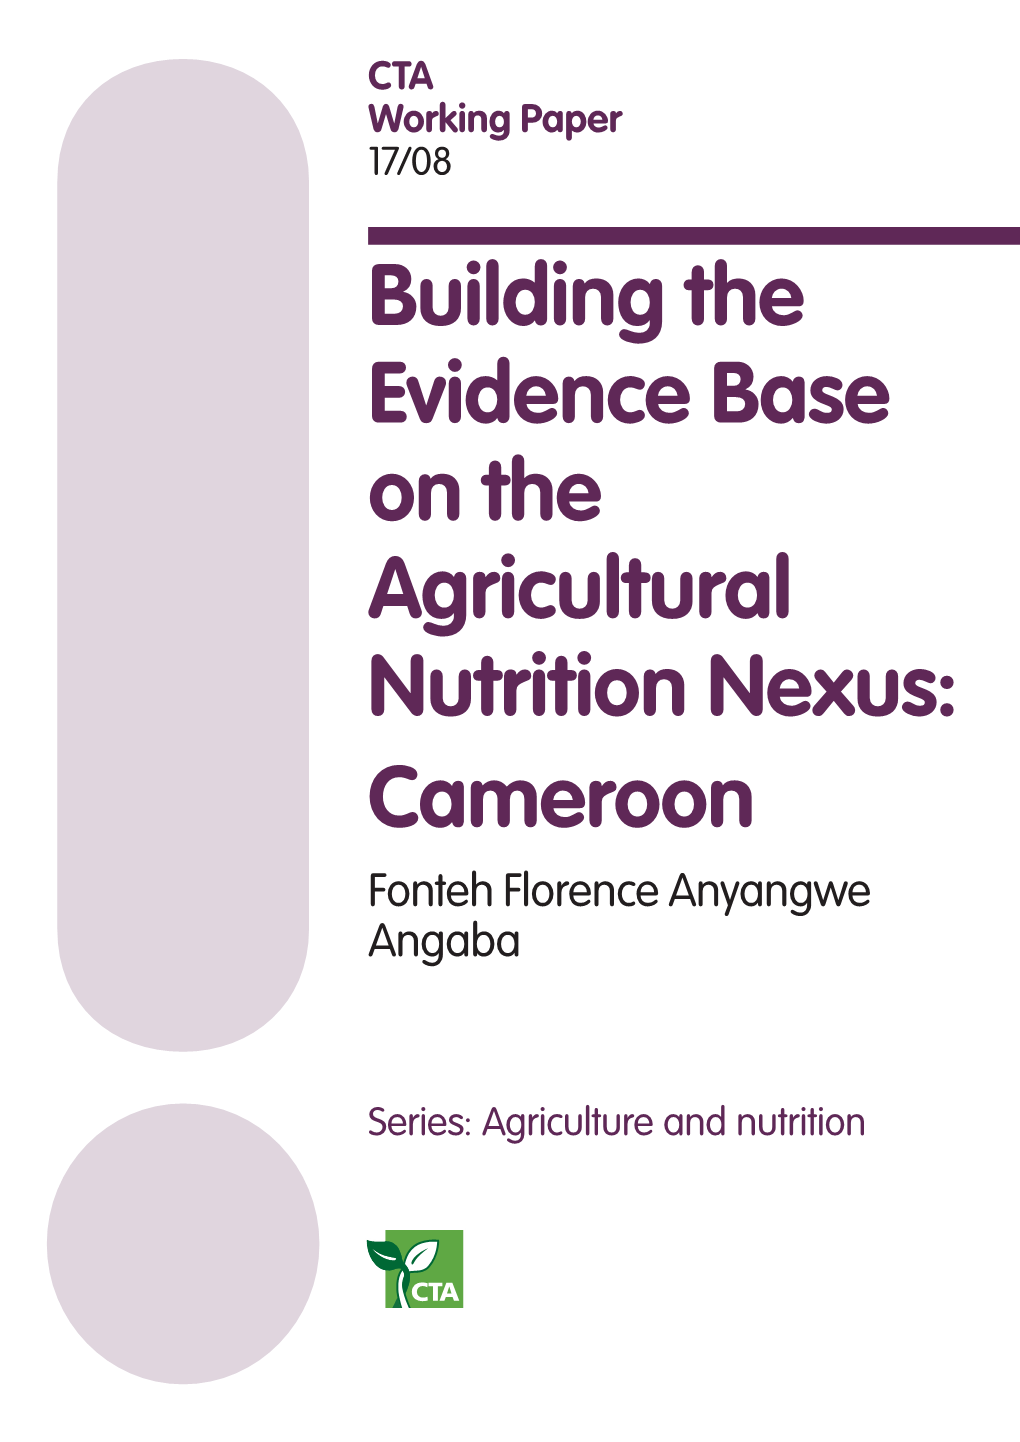 Building the Evidence Base on the Agricultural Nutrition Nexus: Cameroon Fonteh Florence Anyangwe Angaba